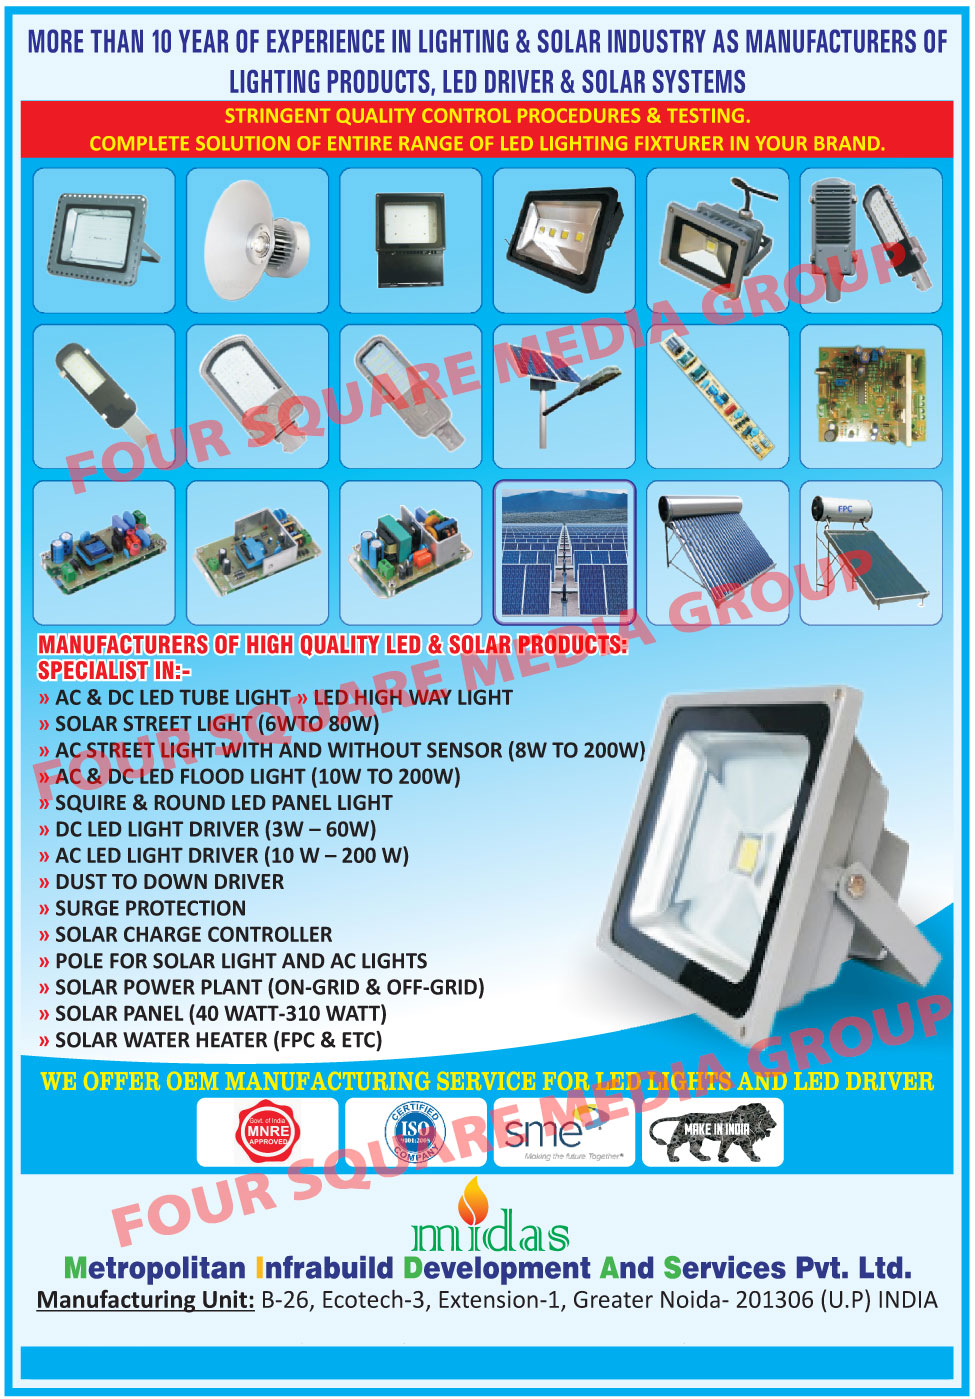 Led Lights, AC Led Tube Lights, DC Led Tube Lights, Led High Way Lights, Solar Street Lights, AC Street Lights, AC Led Flood Lights, DC Led Flood Lights, Led Panel Lights, Square Led Panel Lights, Round Led Panel Lights, DC Led Light Drivers, AC Led Light Drivers, Dust To Down Drivers, Solar Charge Controllers, Solar Light Poles, AC Light Poles, Solar Power Plant, Solar Panels, Solar Water Heaters, AC Led Light Surge Protection, Led Drivers, Led Light Fixtures, Solar Products